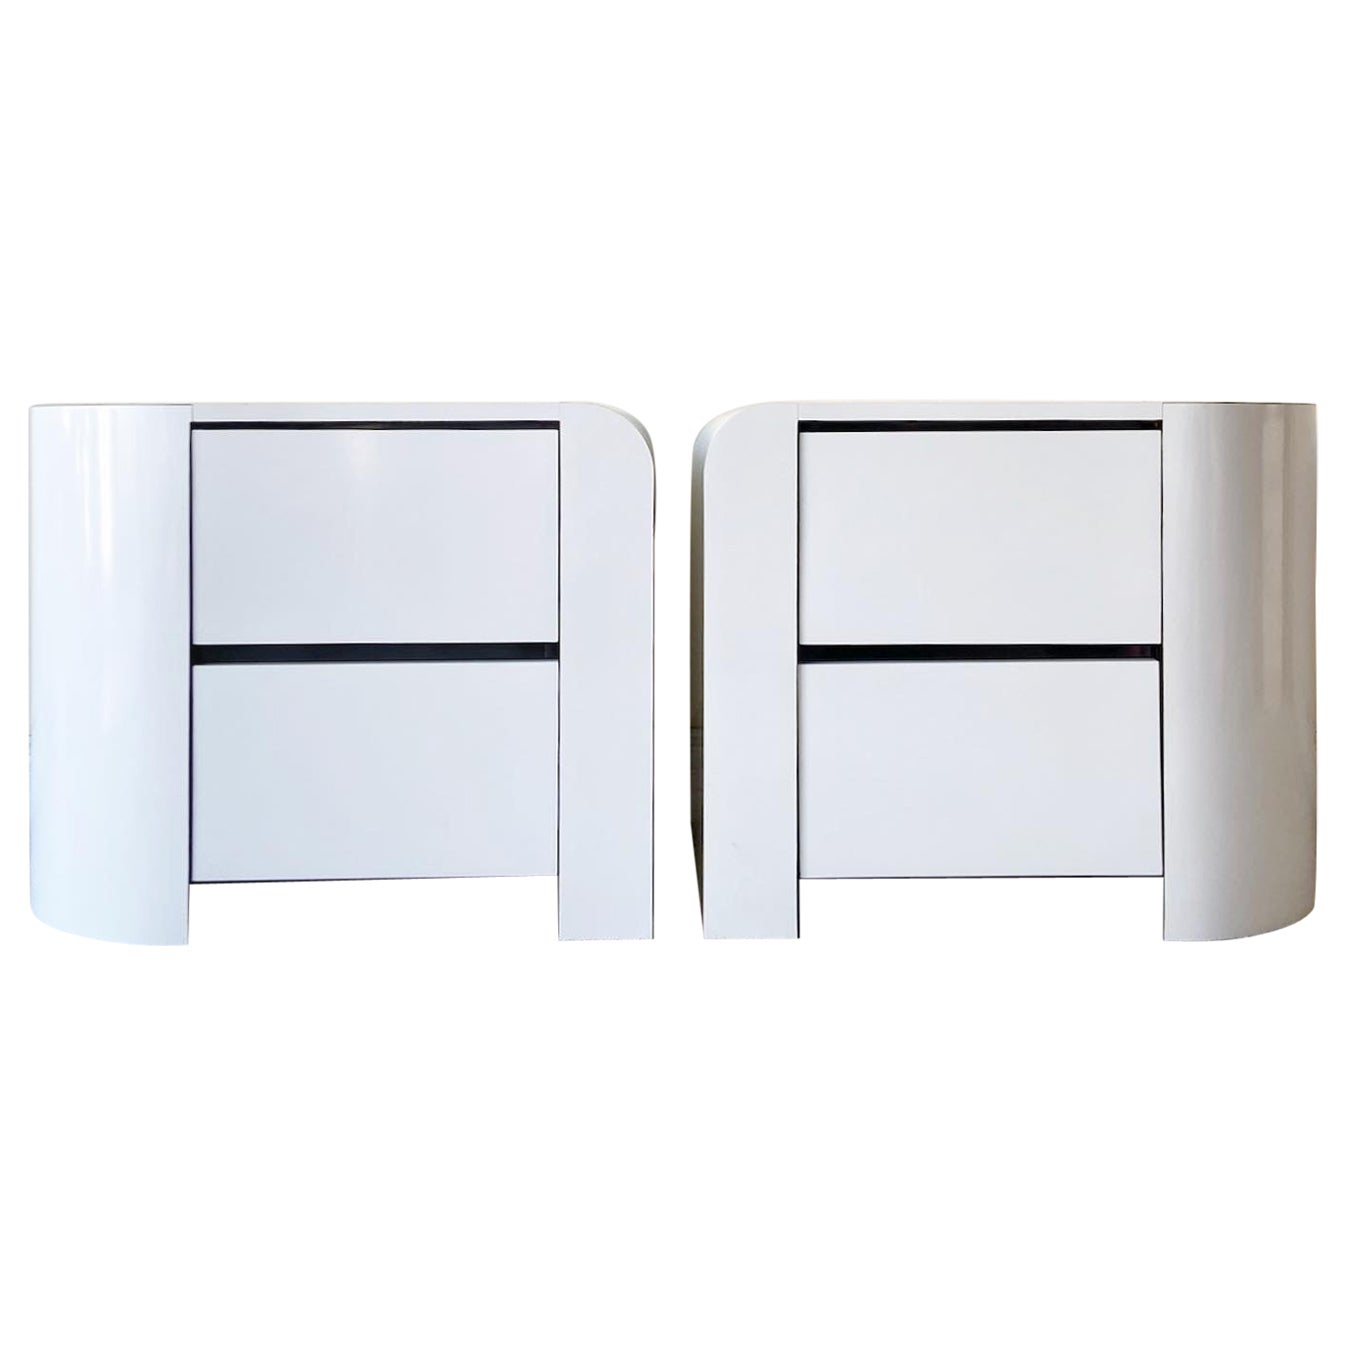 1980s Postmodern White and Black Lacquer Laminate Nightstands - a Pair